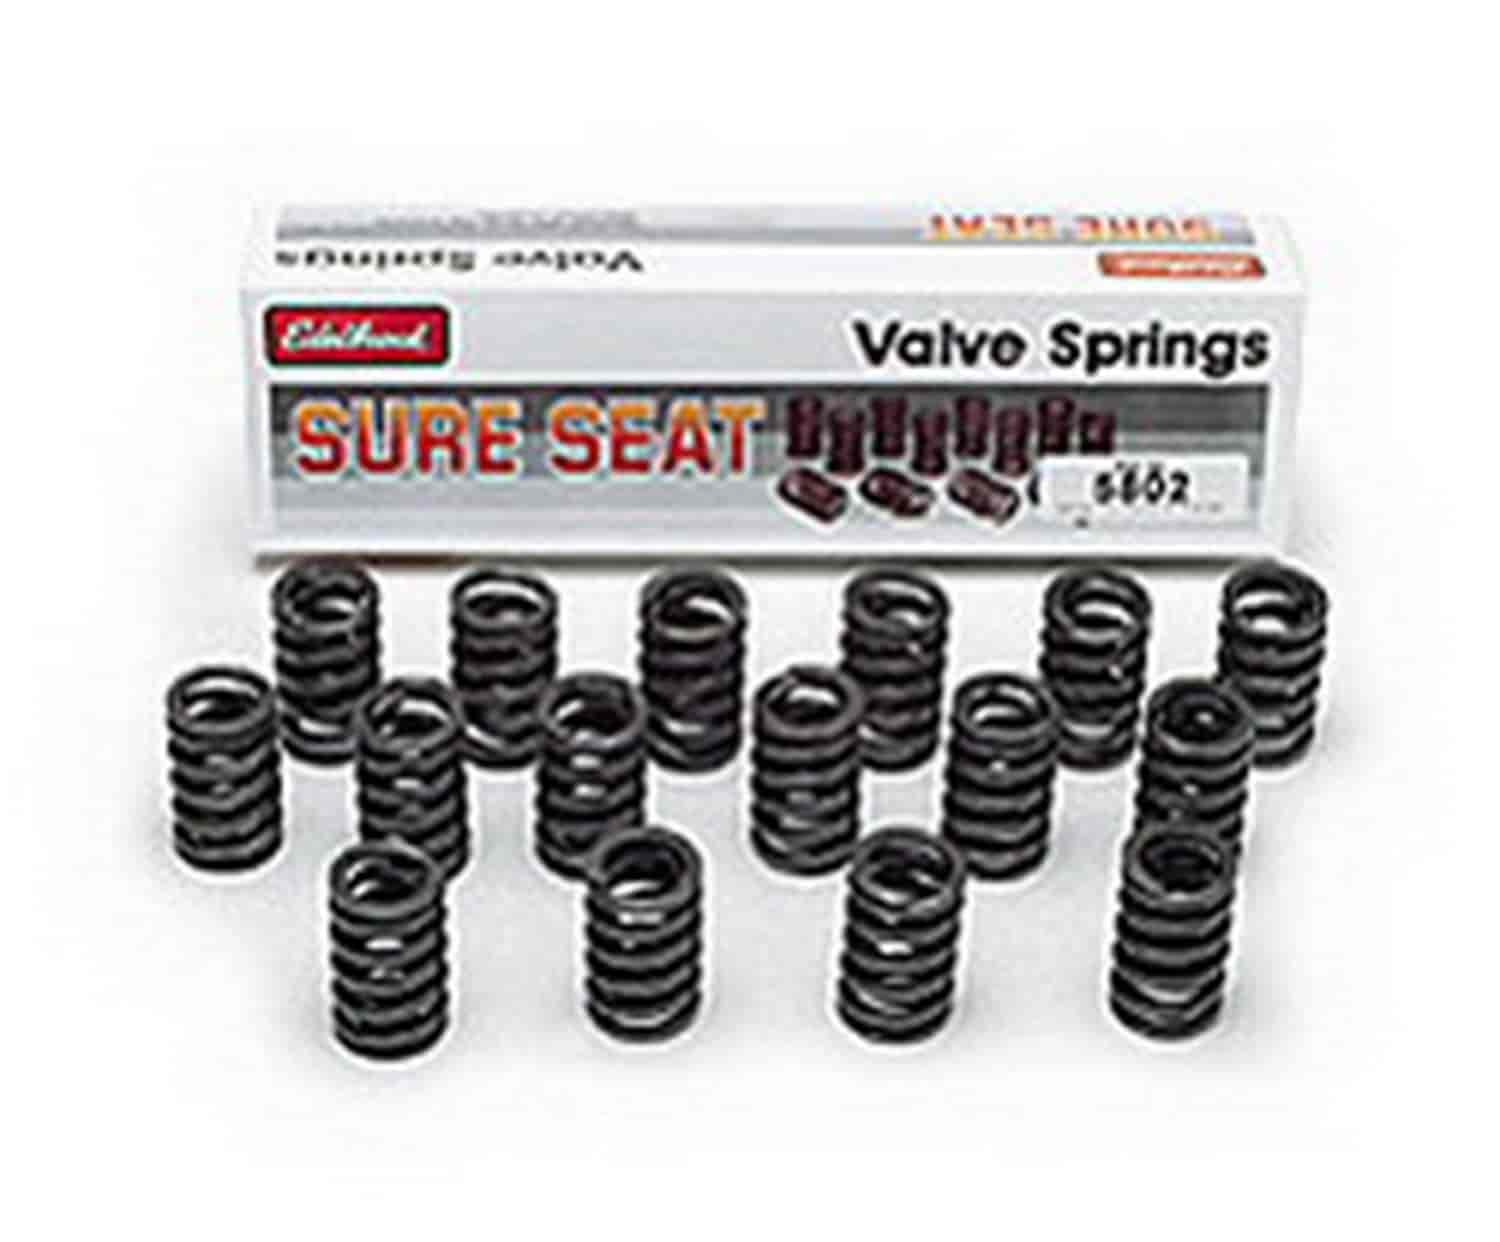 Sure Seat Valve Springs for 1957-1995 Small Block Chevy 262-400 OE Cast Iron Head Rotator